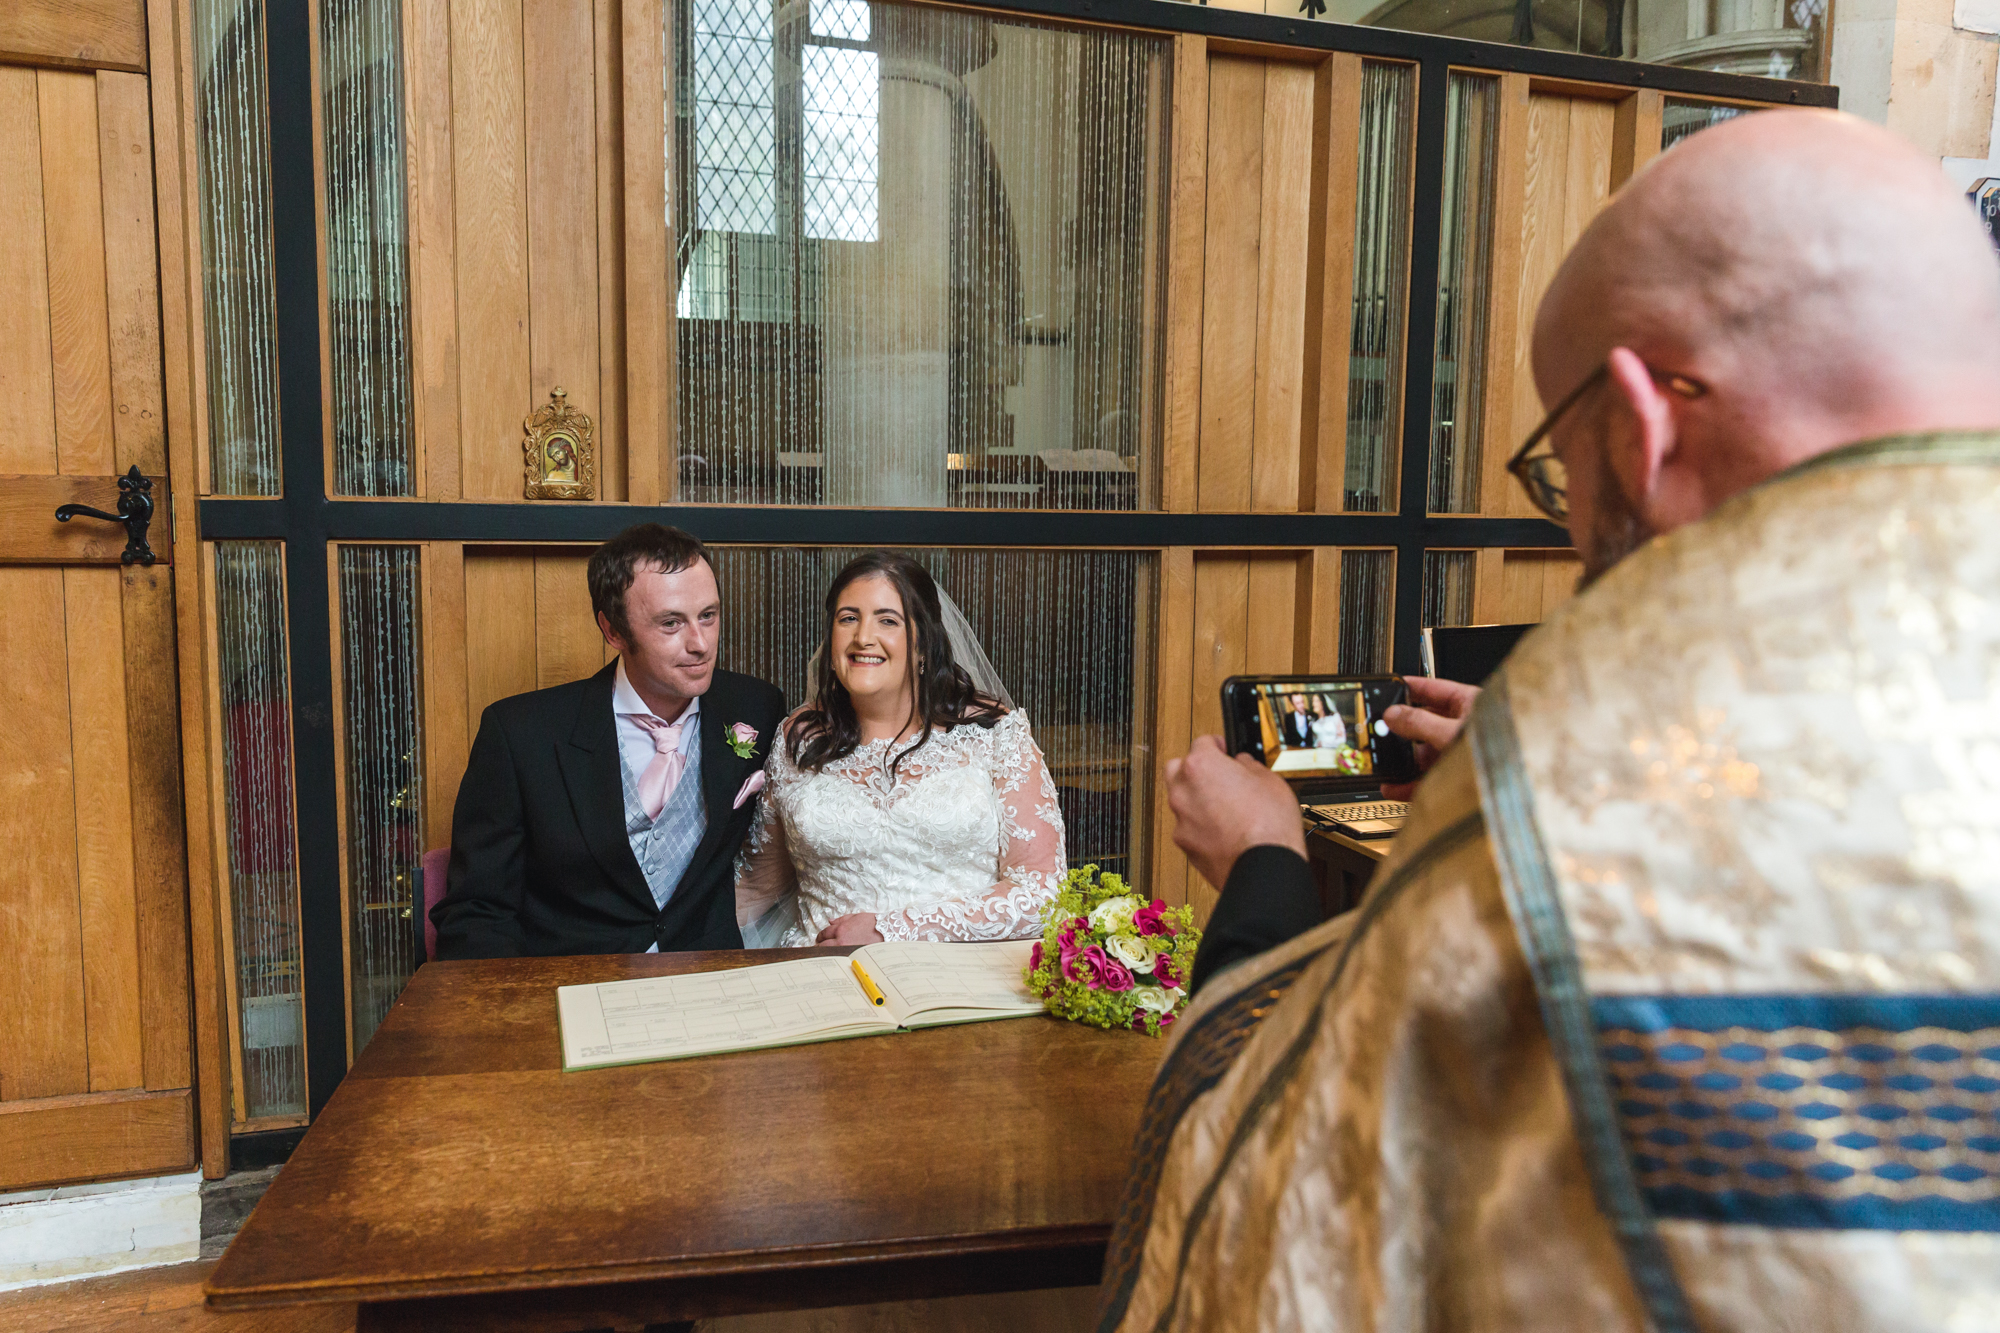 Signing the register at St Martins Church, Caerphilly